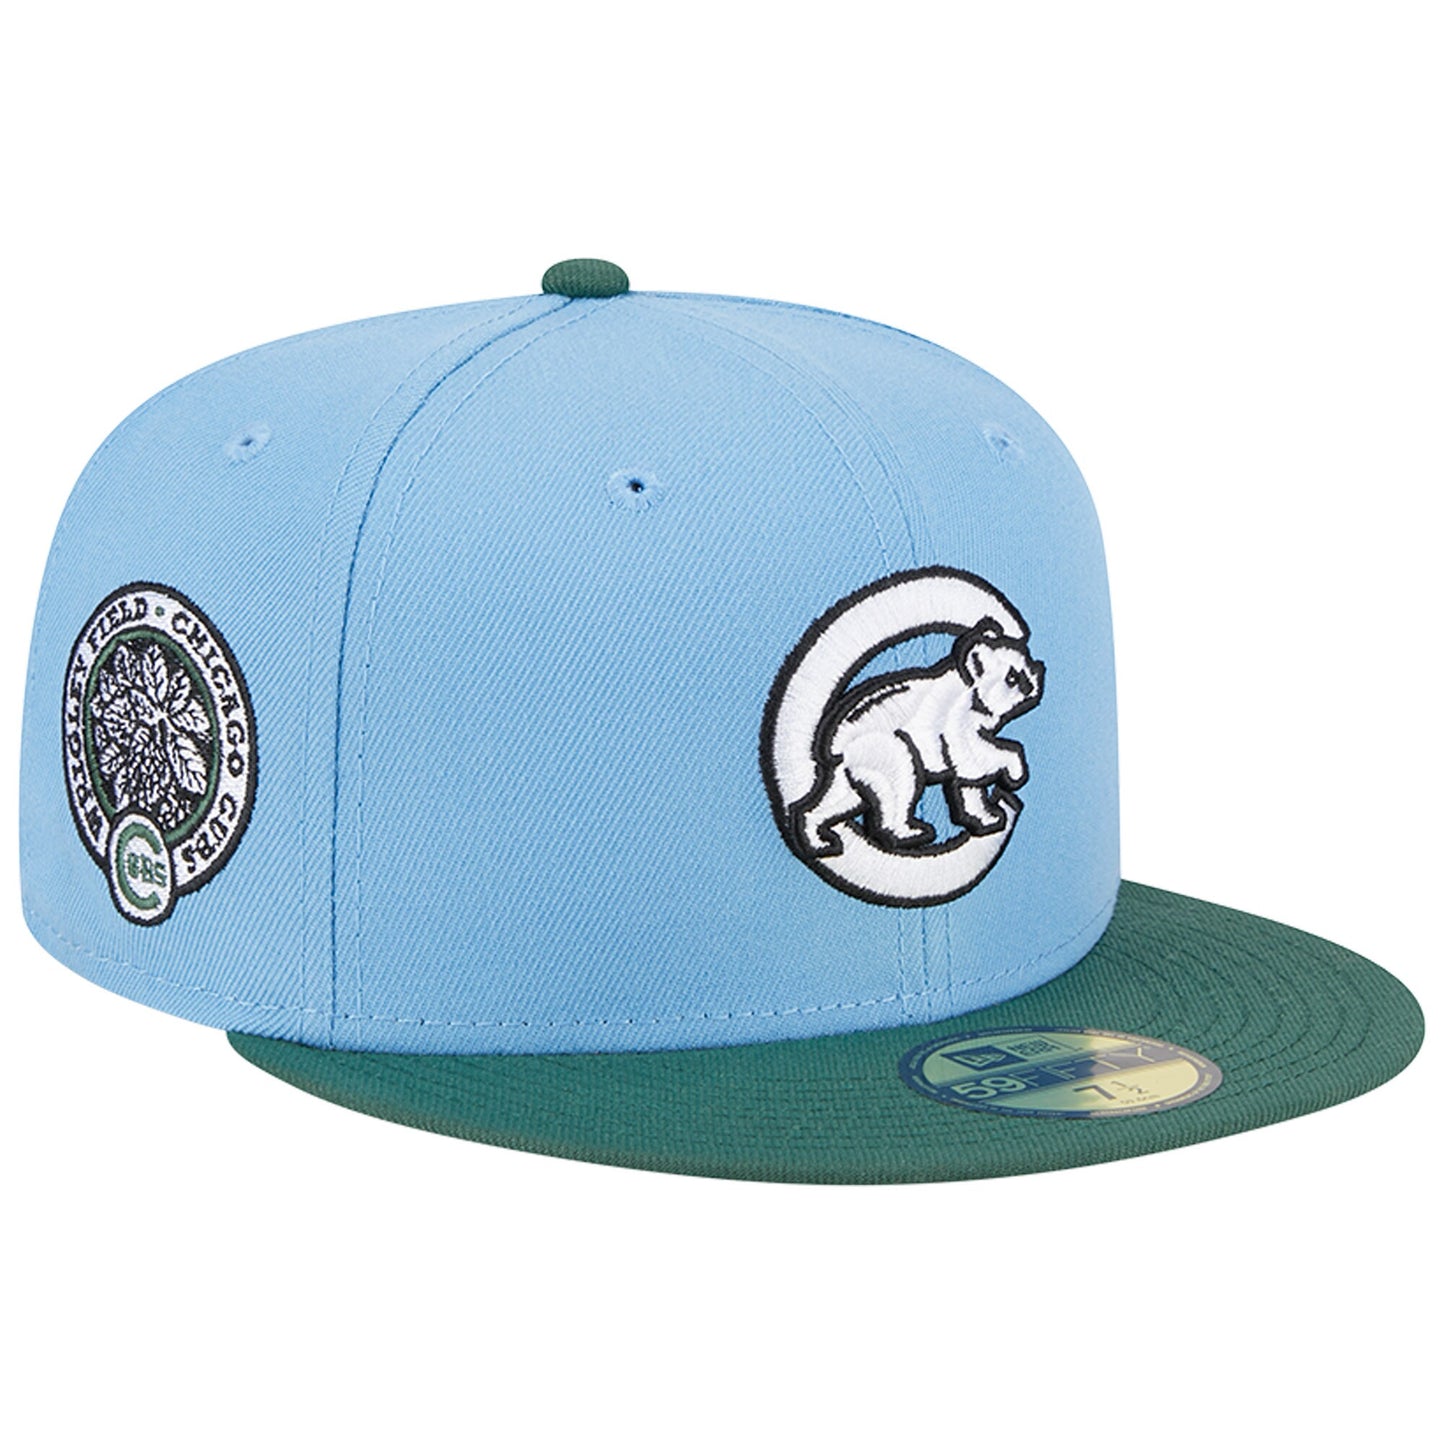 Chicago Cubs New Era Wrigley Field 59FIFTY Fitted Hat - Sky Blue/Cilantro